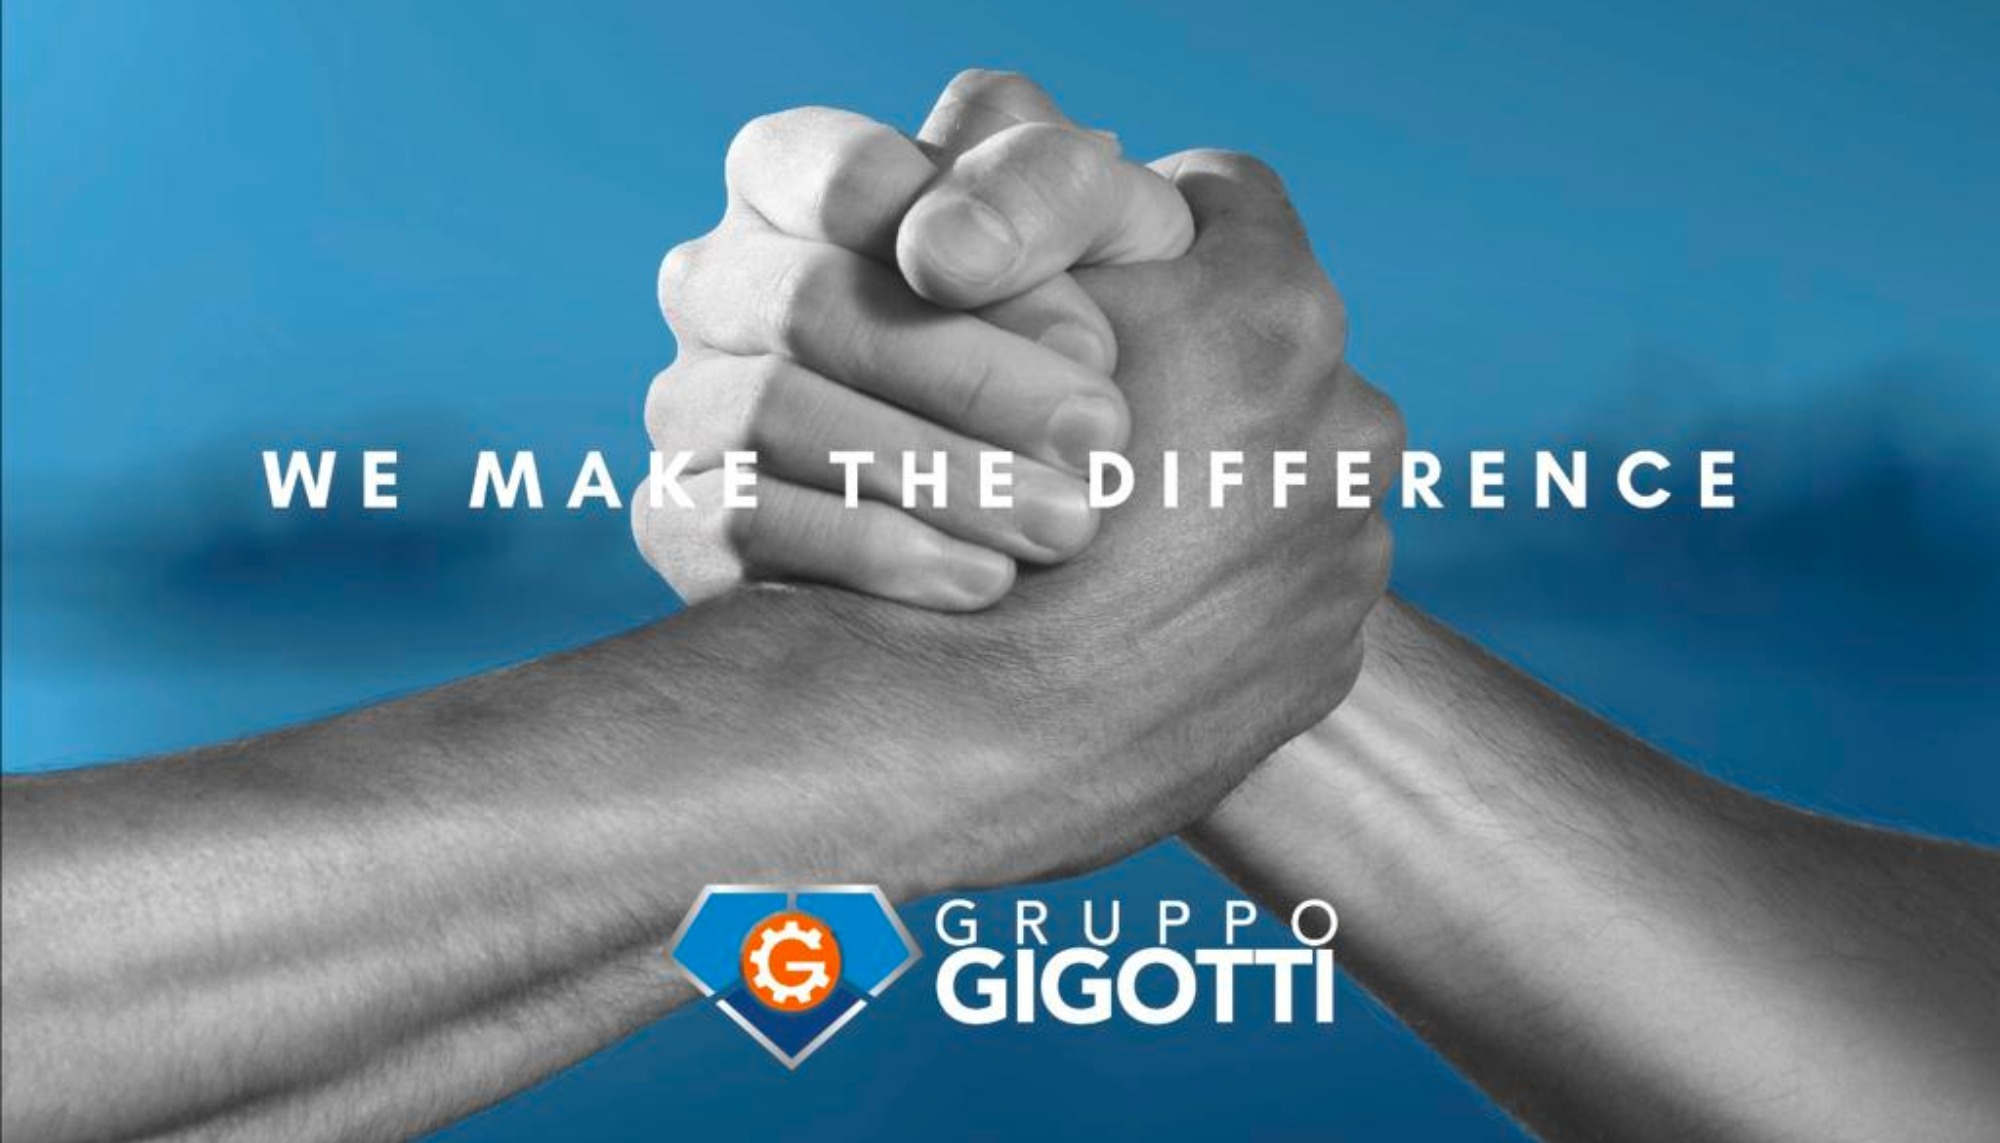 gigotti make the difference